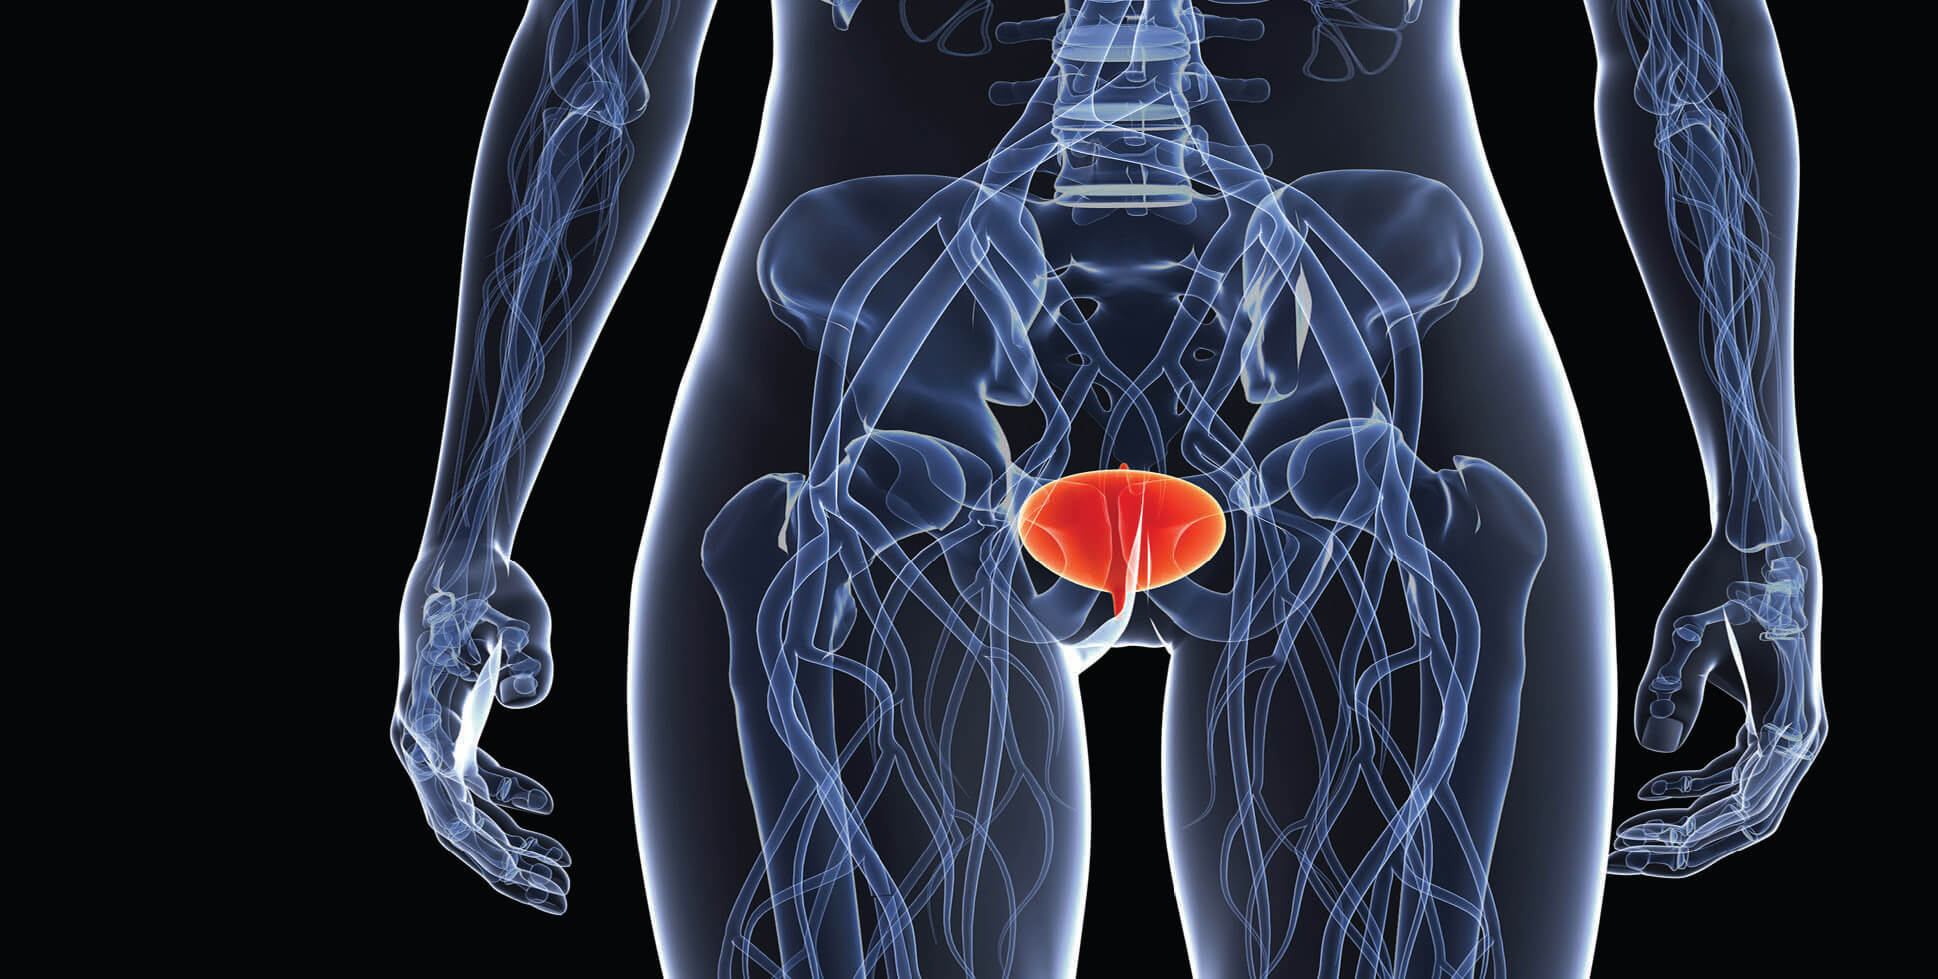 Physiotherapy management of urinary incontinence in females